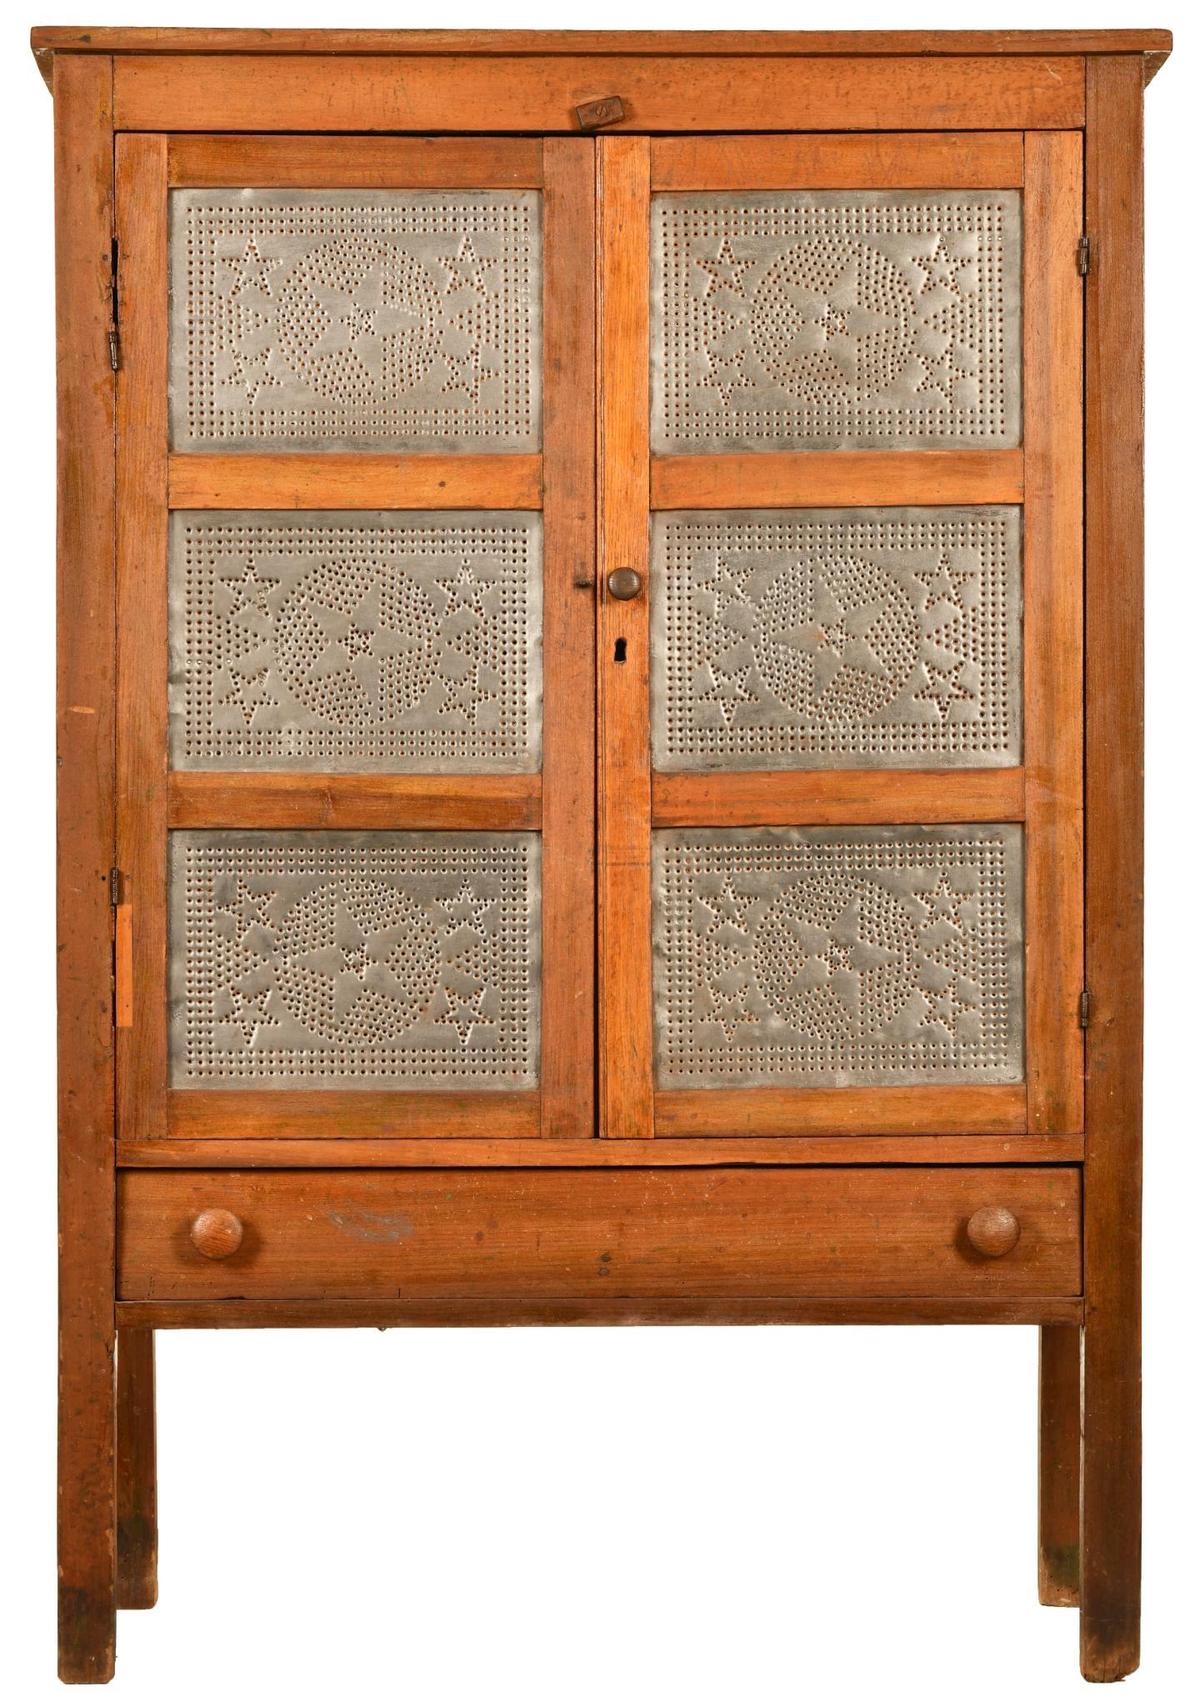 Six Panel Punched Tin Pie Safe